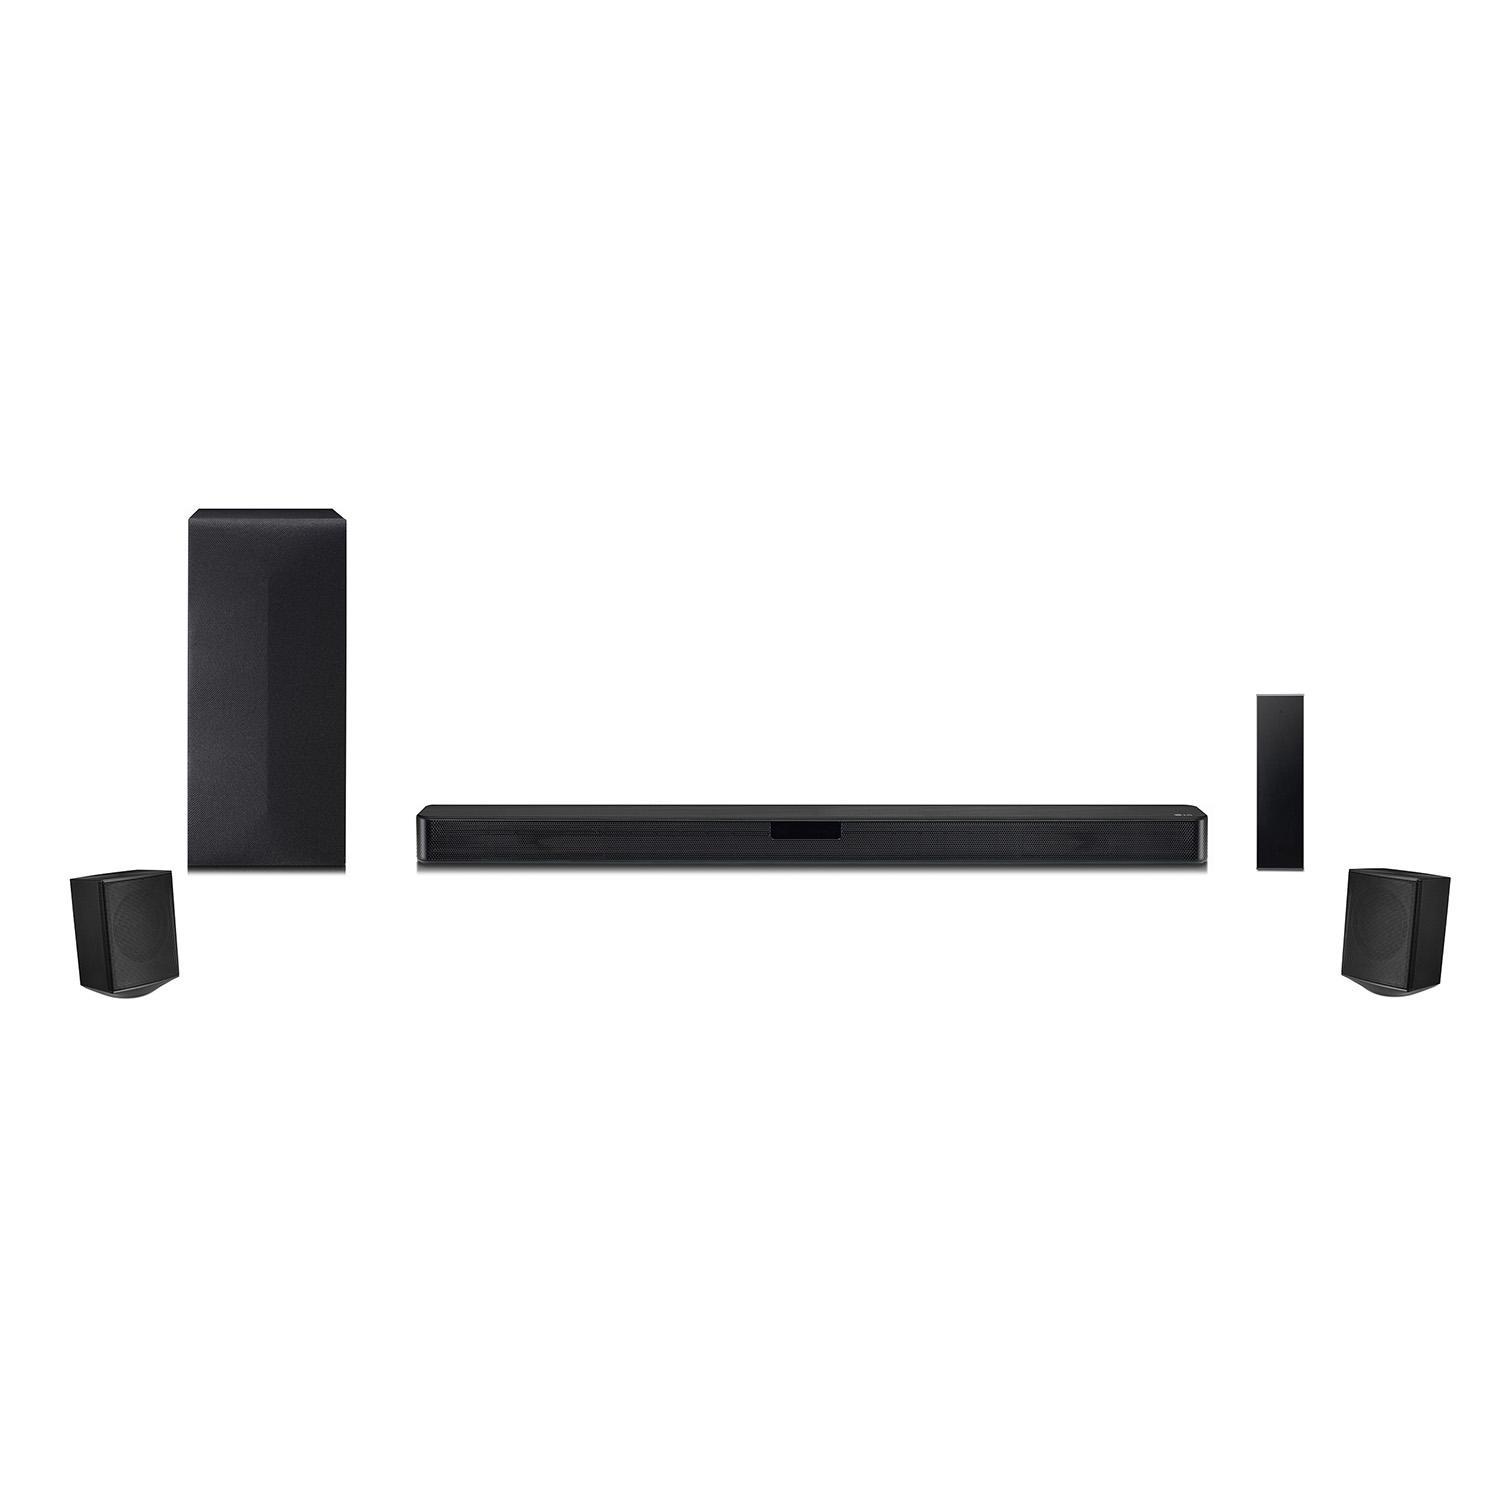 LG 4.1 Channel Soundbar with Surround Sound Speakers,InStore Products